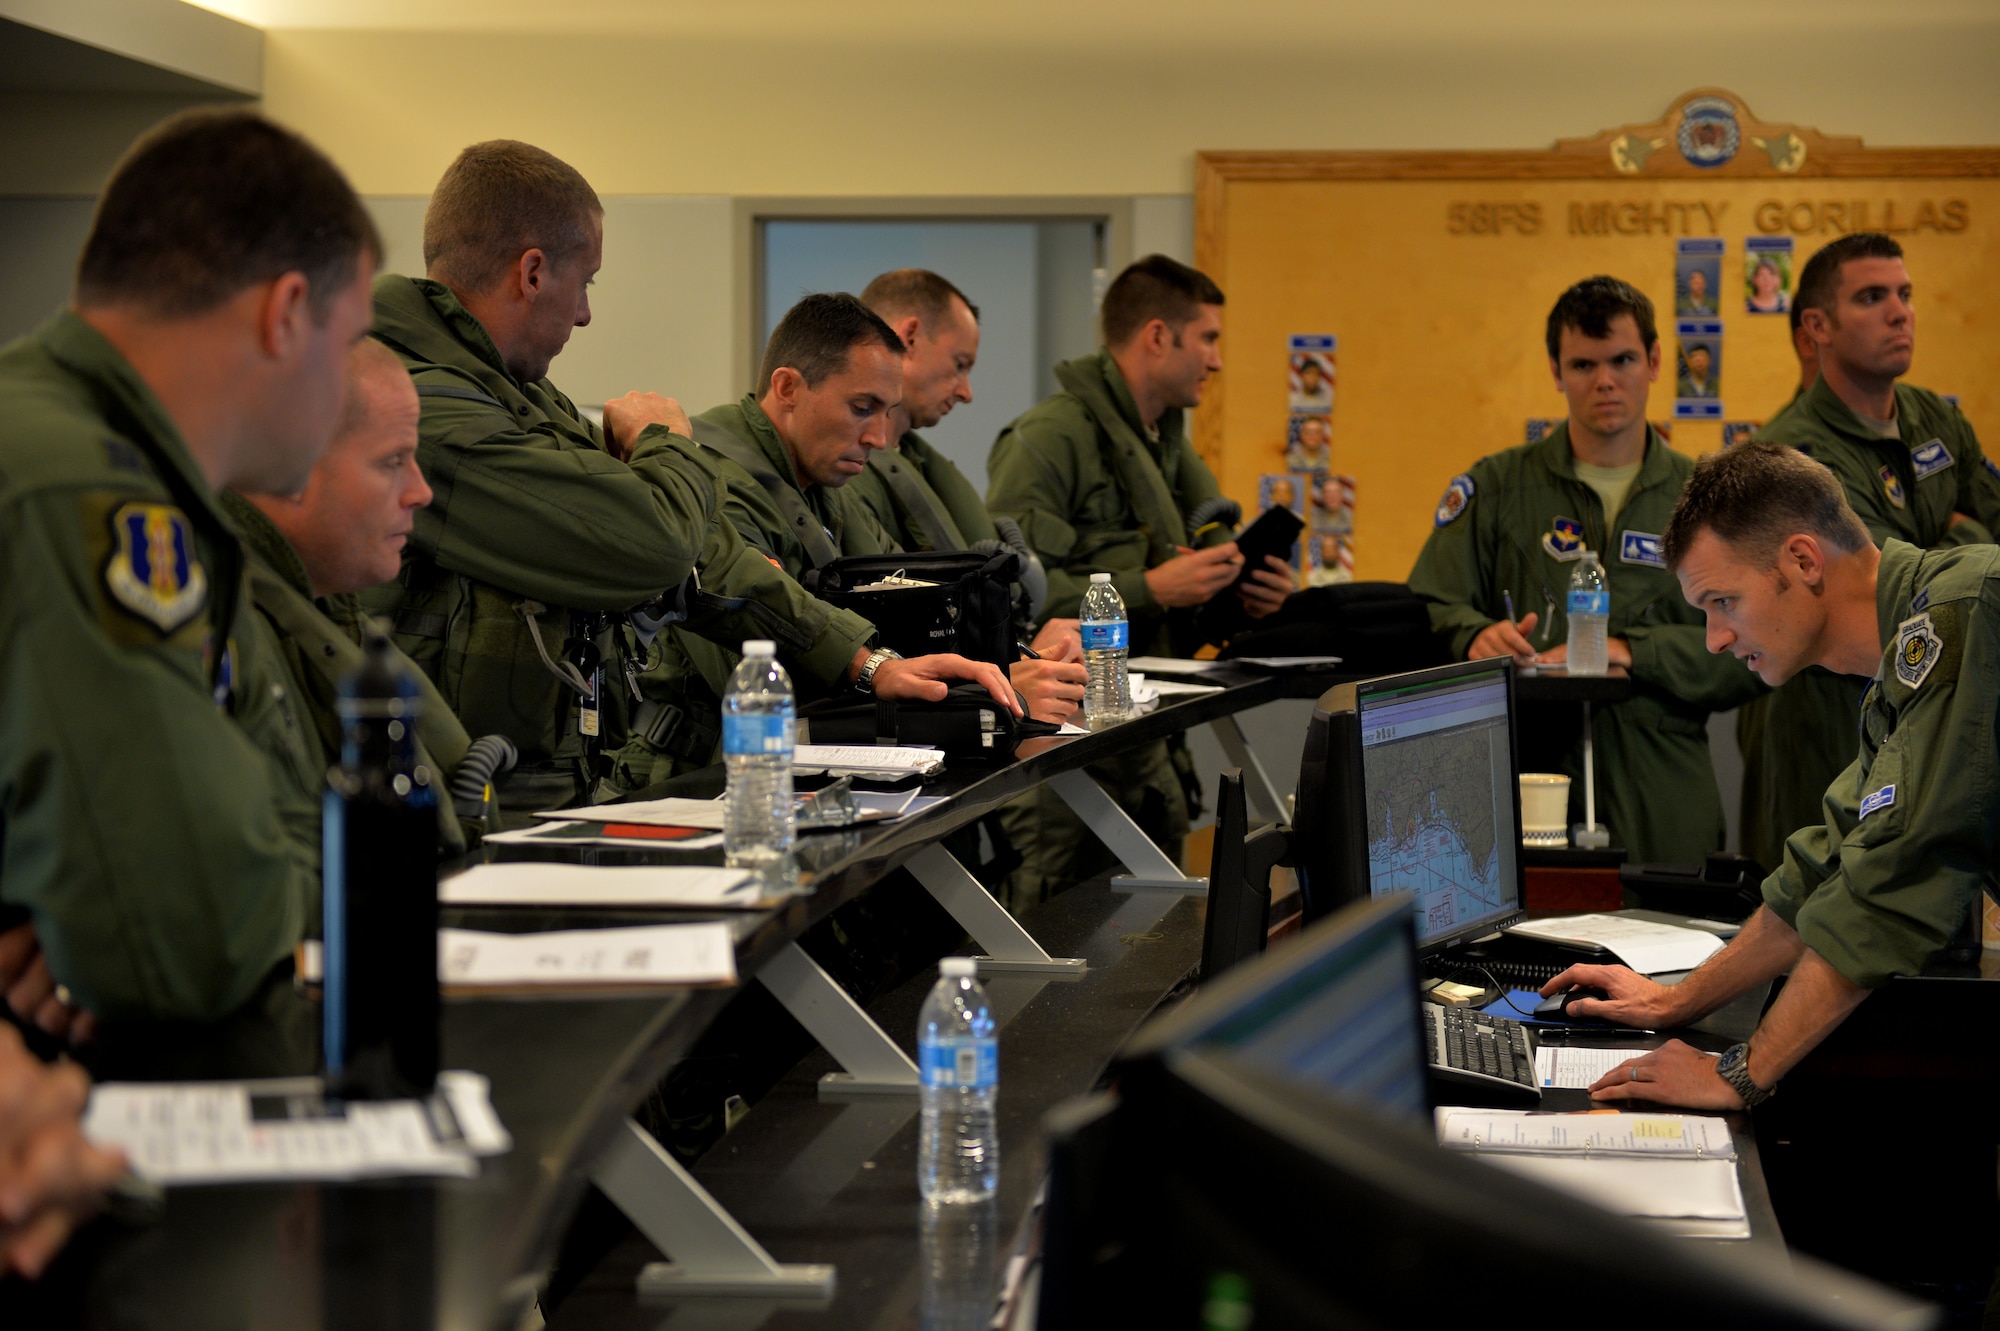 F-35 Lightning II and F-22 Raptor pilots attend a preflight briefing before an integrated training mission on Eglin Air Force Base, Florida, Nov. 6, 2014. The U.S. Air Force deployed four F-22 Raptors from Joint Base Langley-Eustis, Virginia, to Eglin Air Force Base, Florida, for the first operational integration training mission with the F-35A Lightning II assigned to the 33rd Fighter Wing. The purpose of the training was to improve integrated employment of fifth-generation assets and tactics. (U.S. Air Force photo/Master Sgt. Shane A. Cuomo)